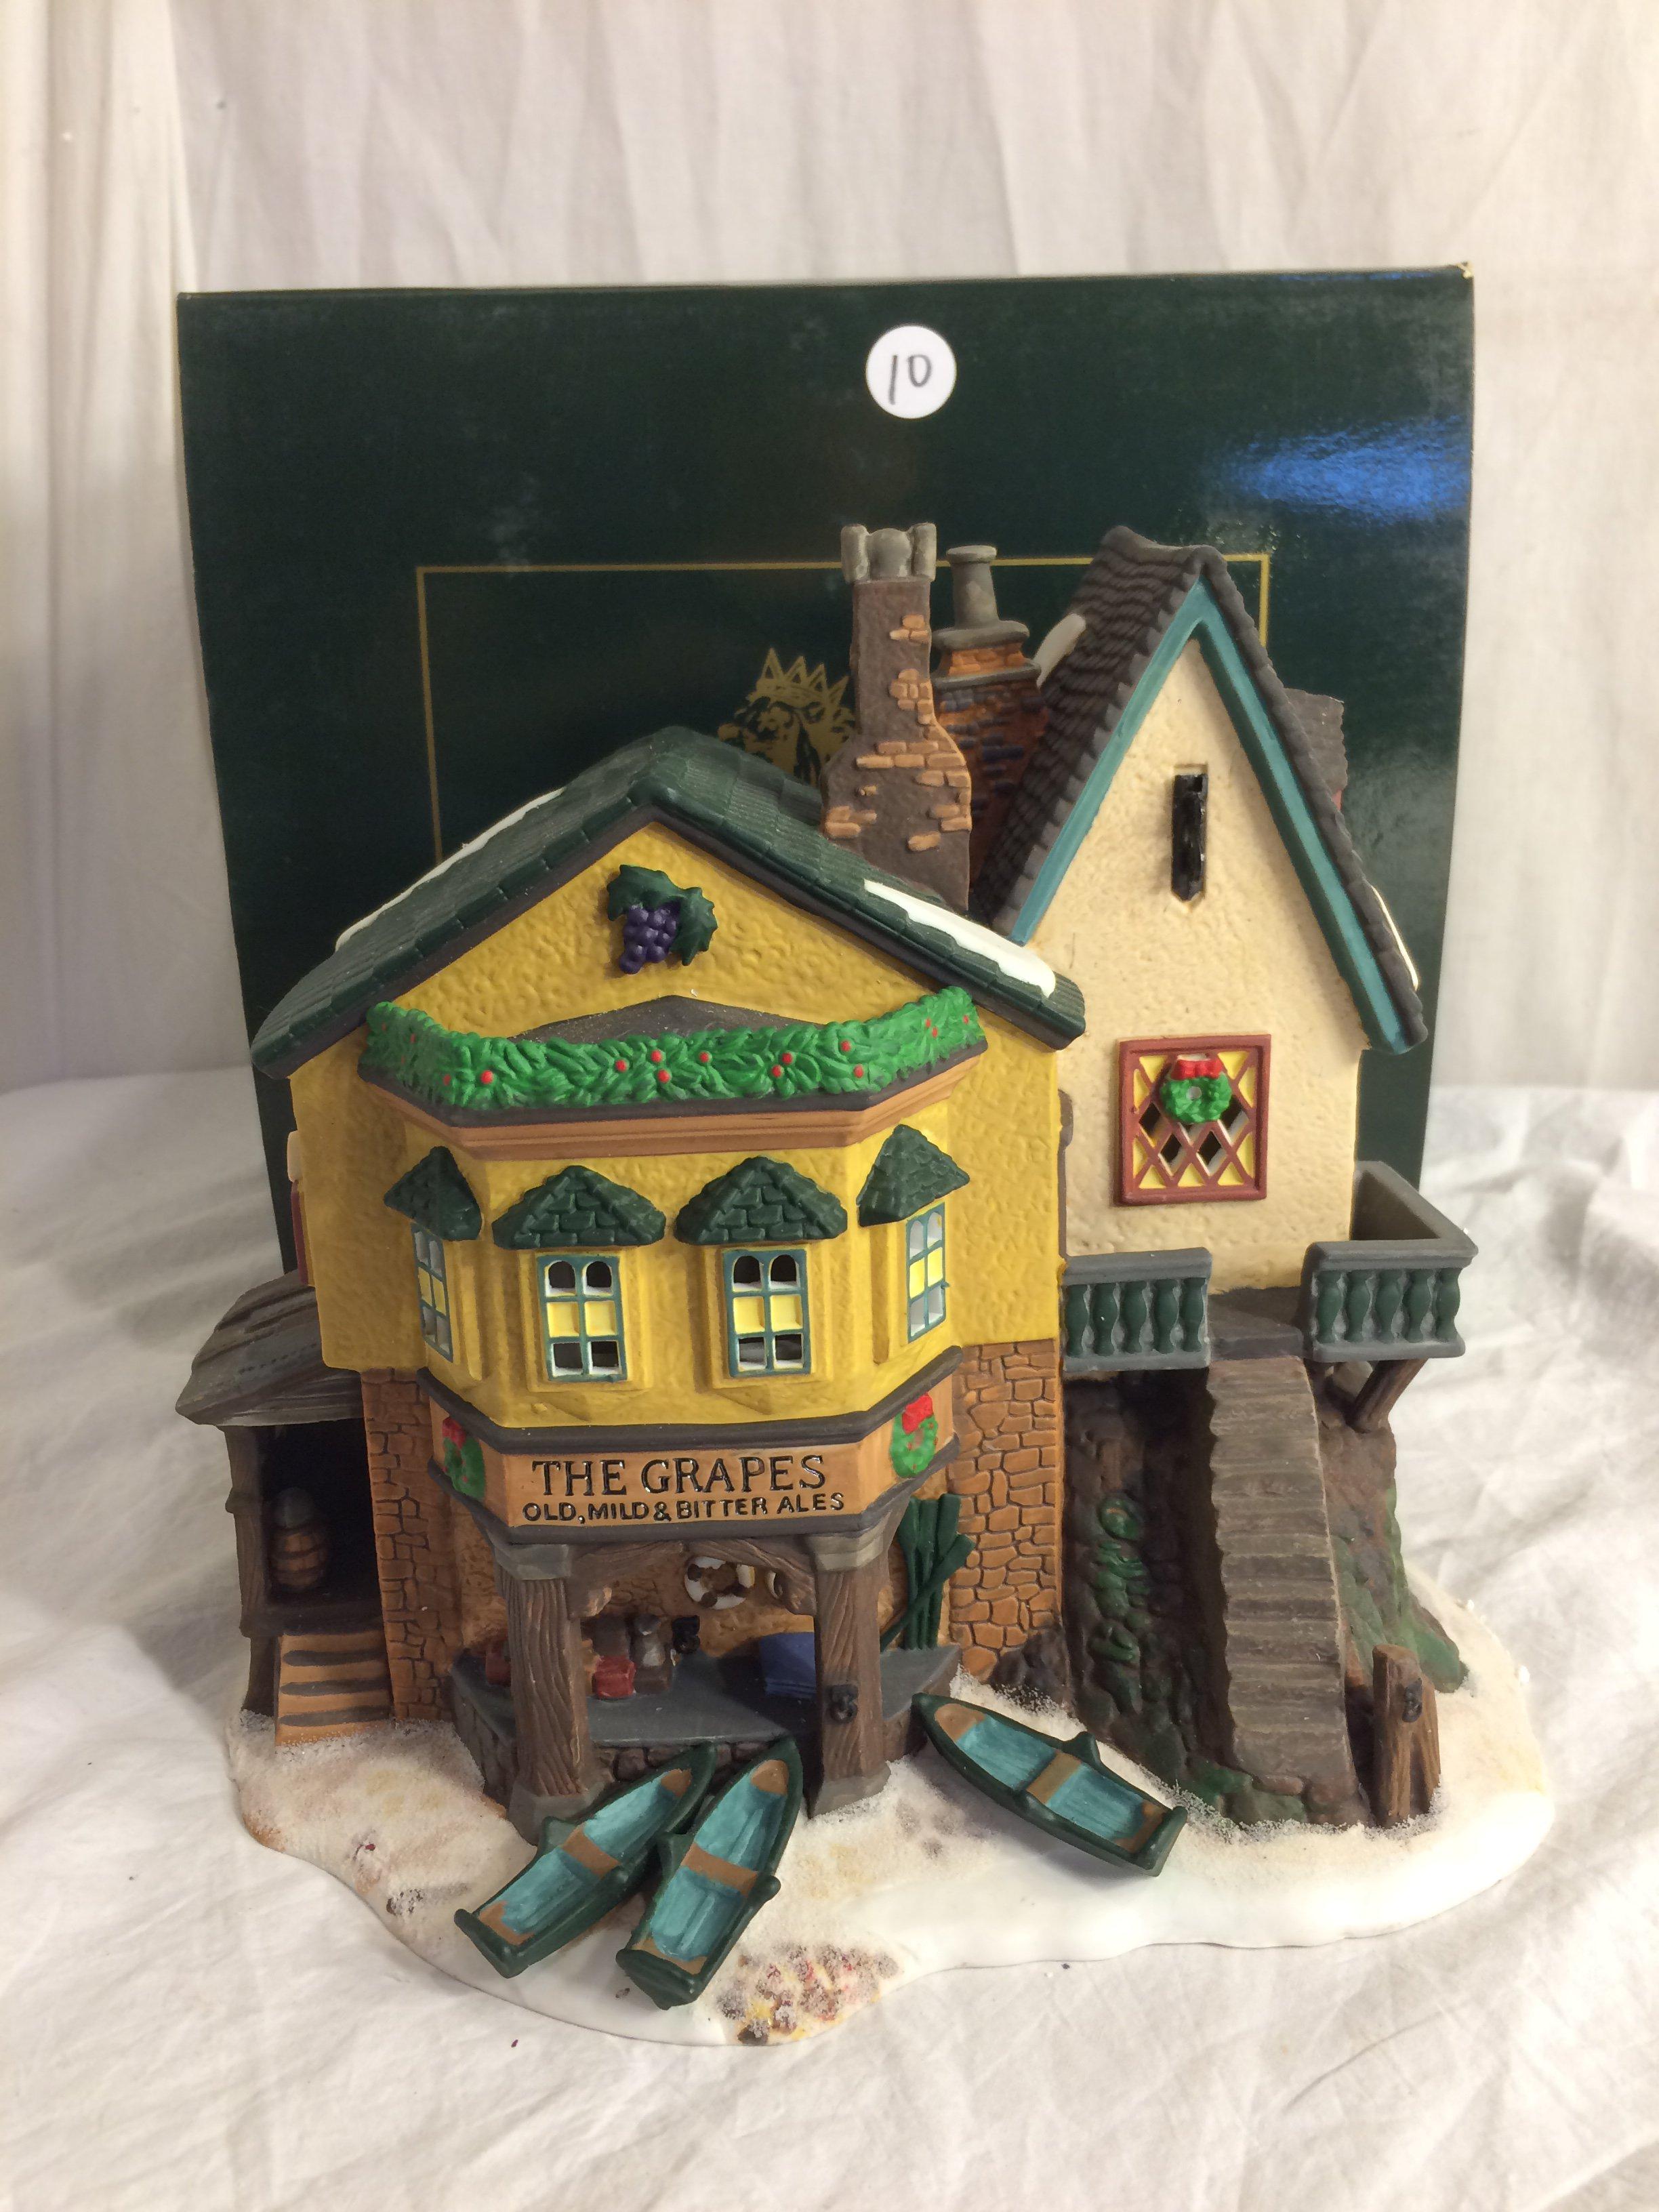 Department 56 Heritage Village Collection Dickens Village Series "Dickens Series the Grapes Inn" 5th